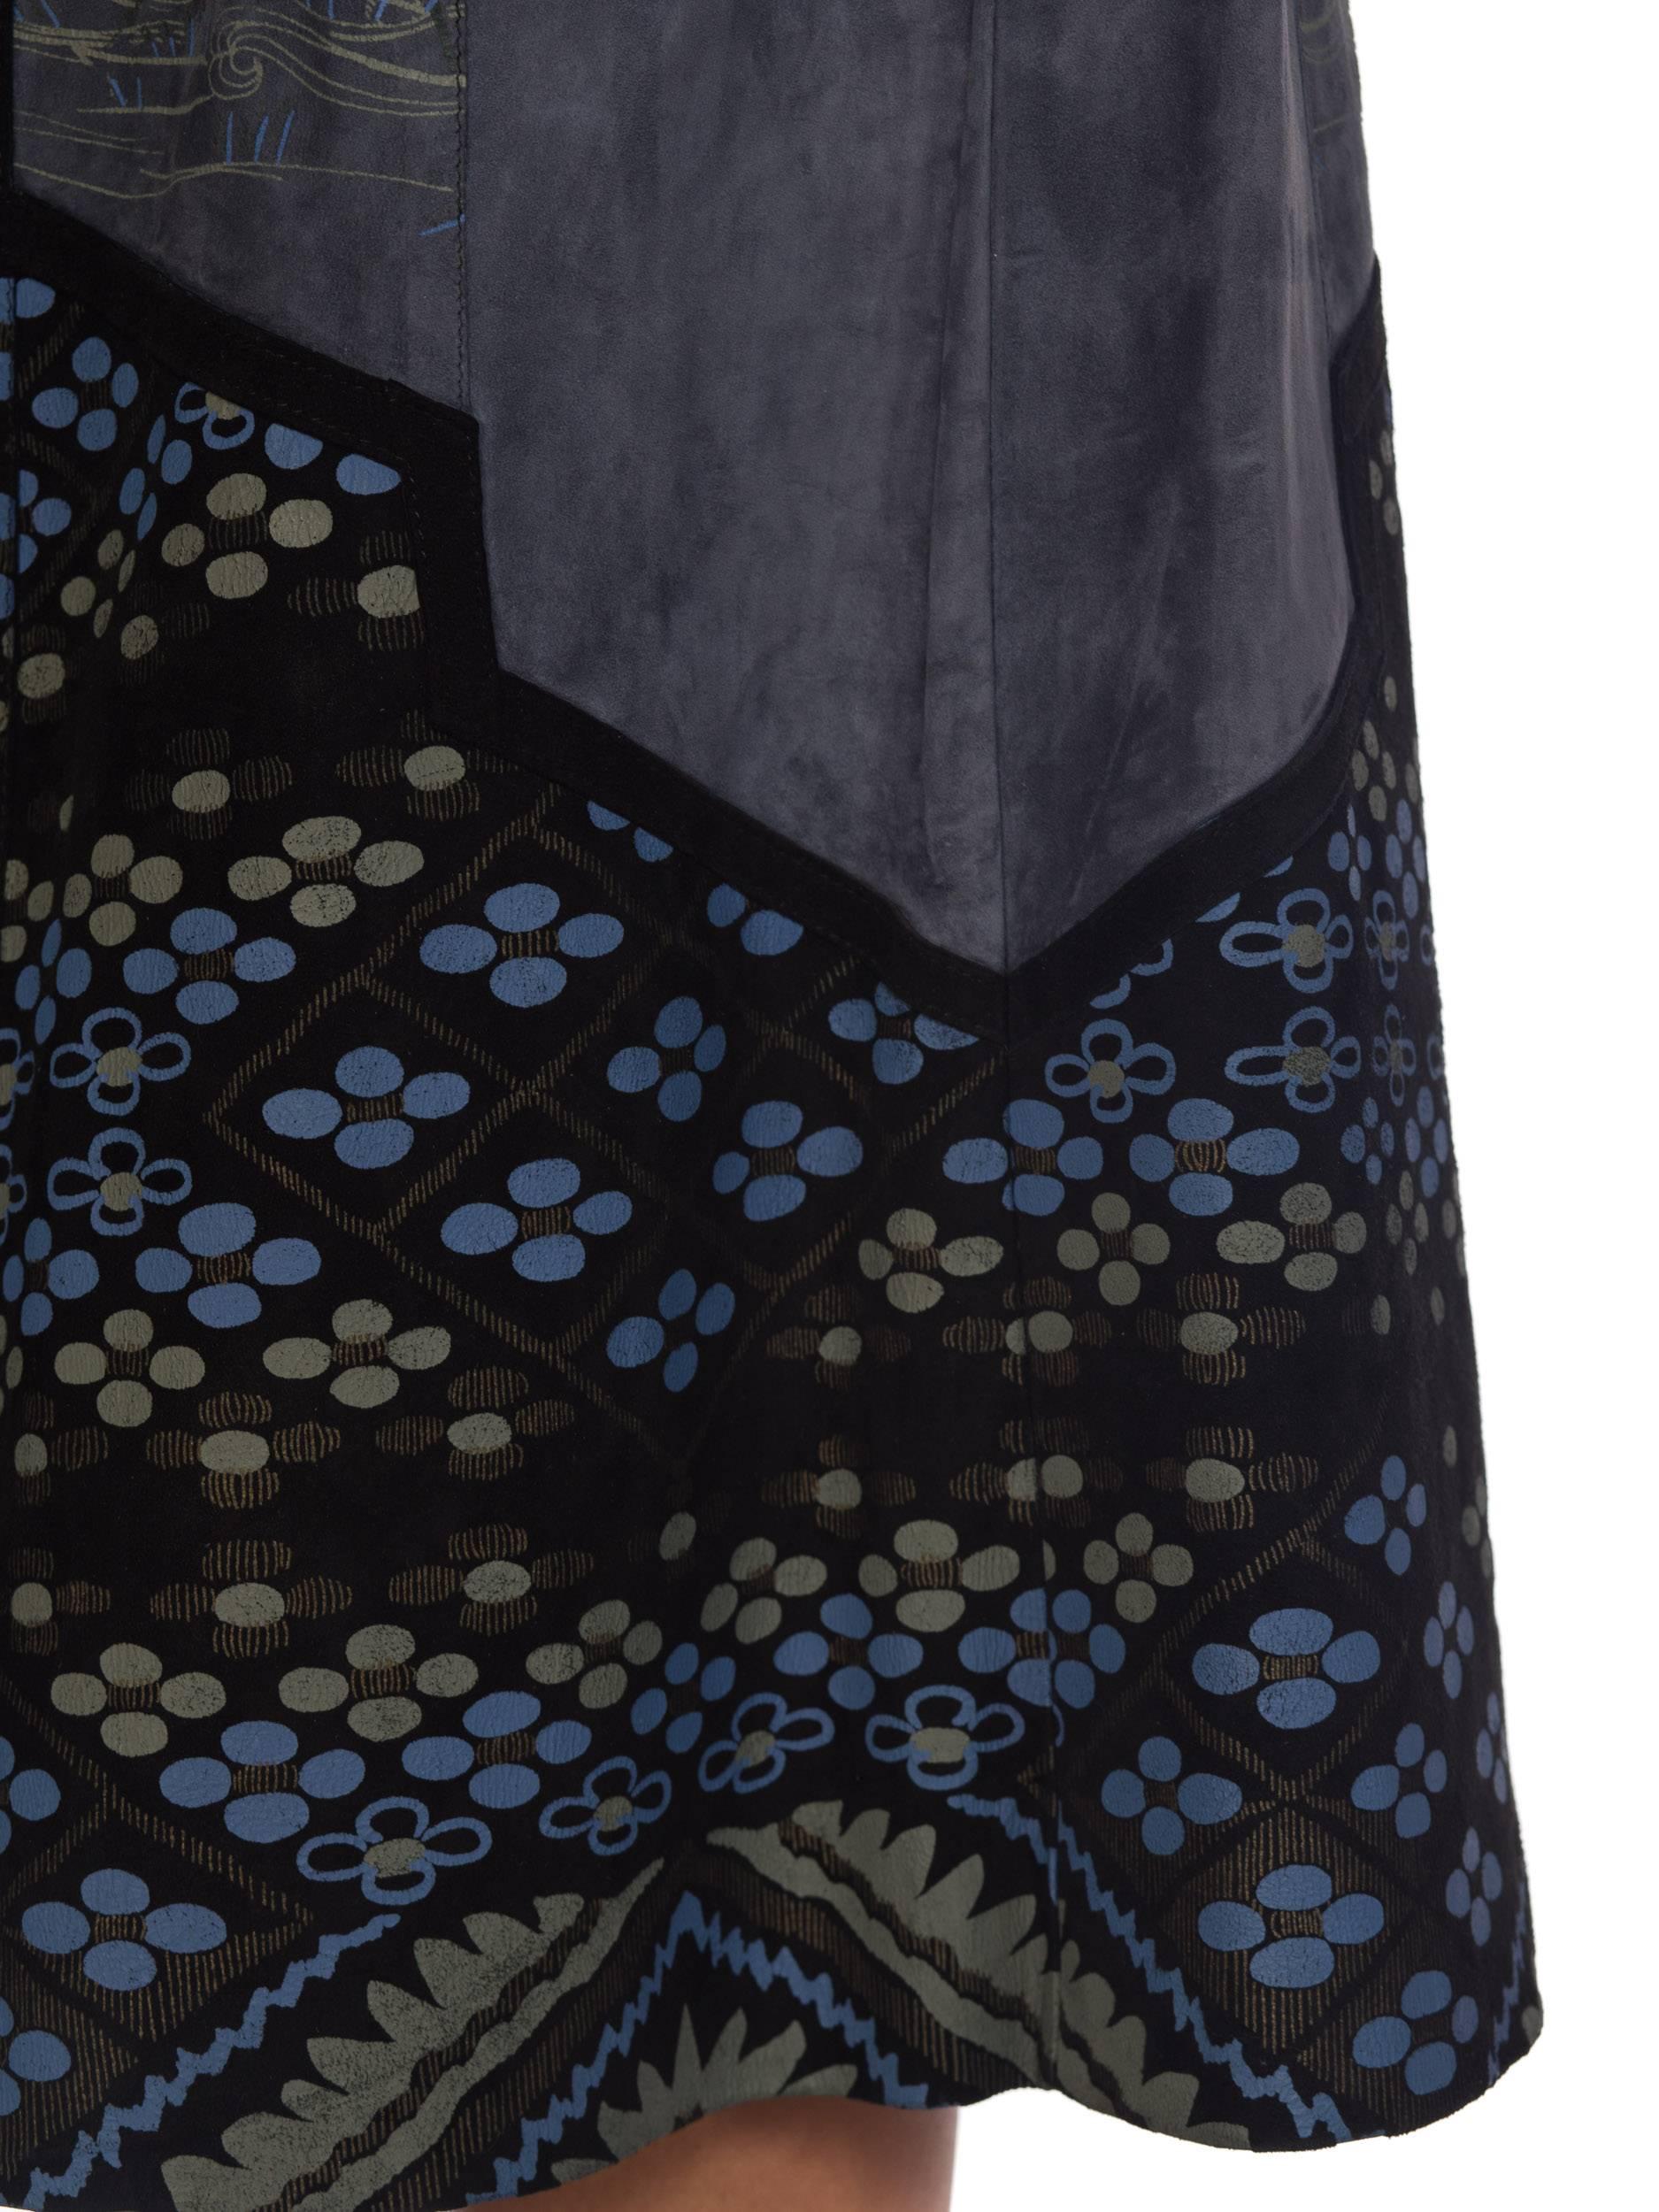 Roberto Cavalli Blue Suede Skirt Set with Printed Suede Panels, 1970s  6